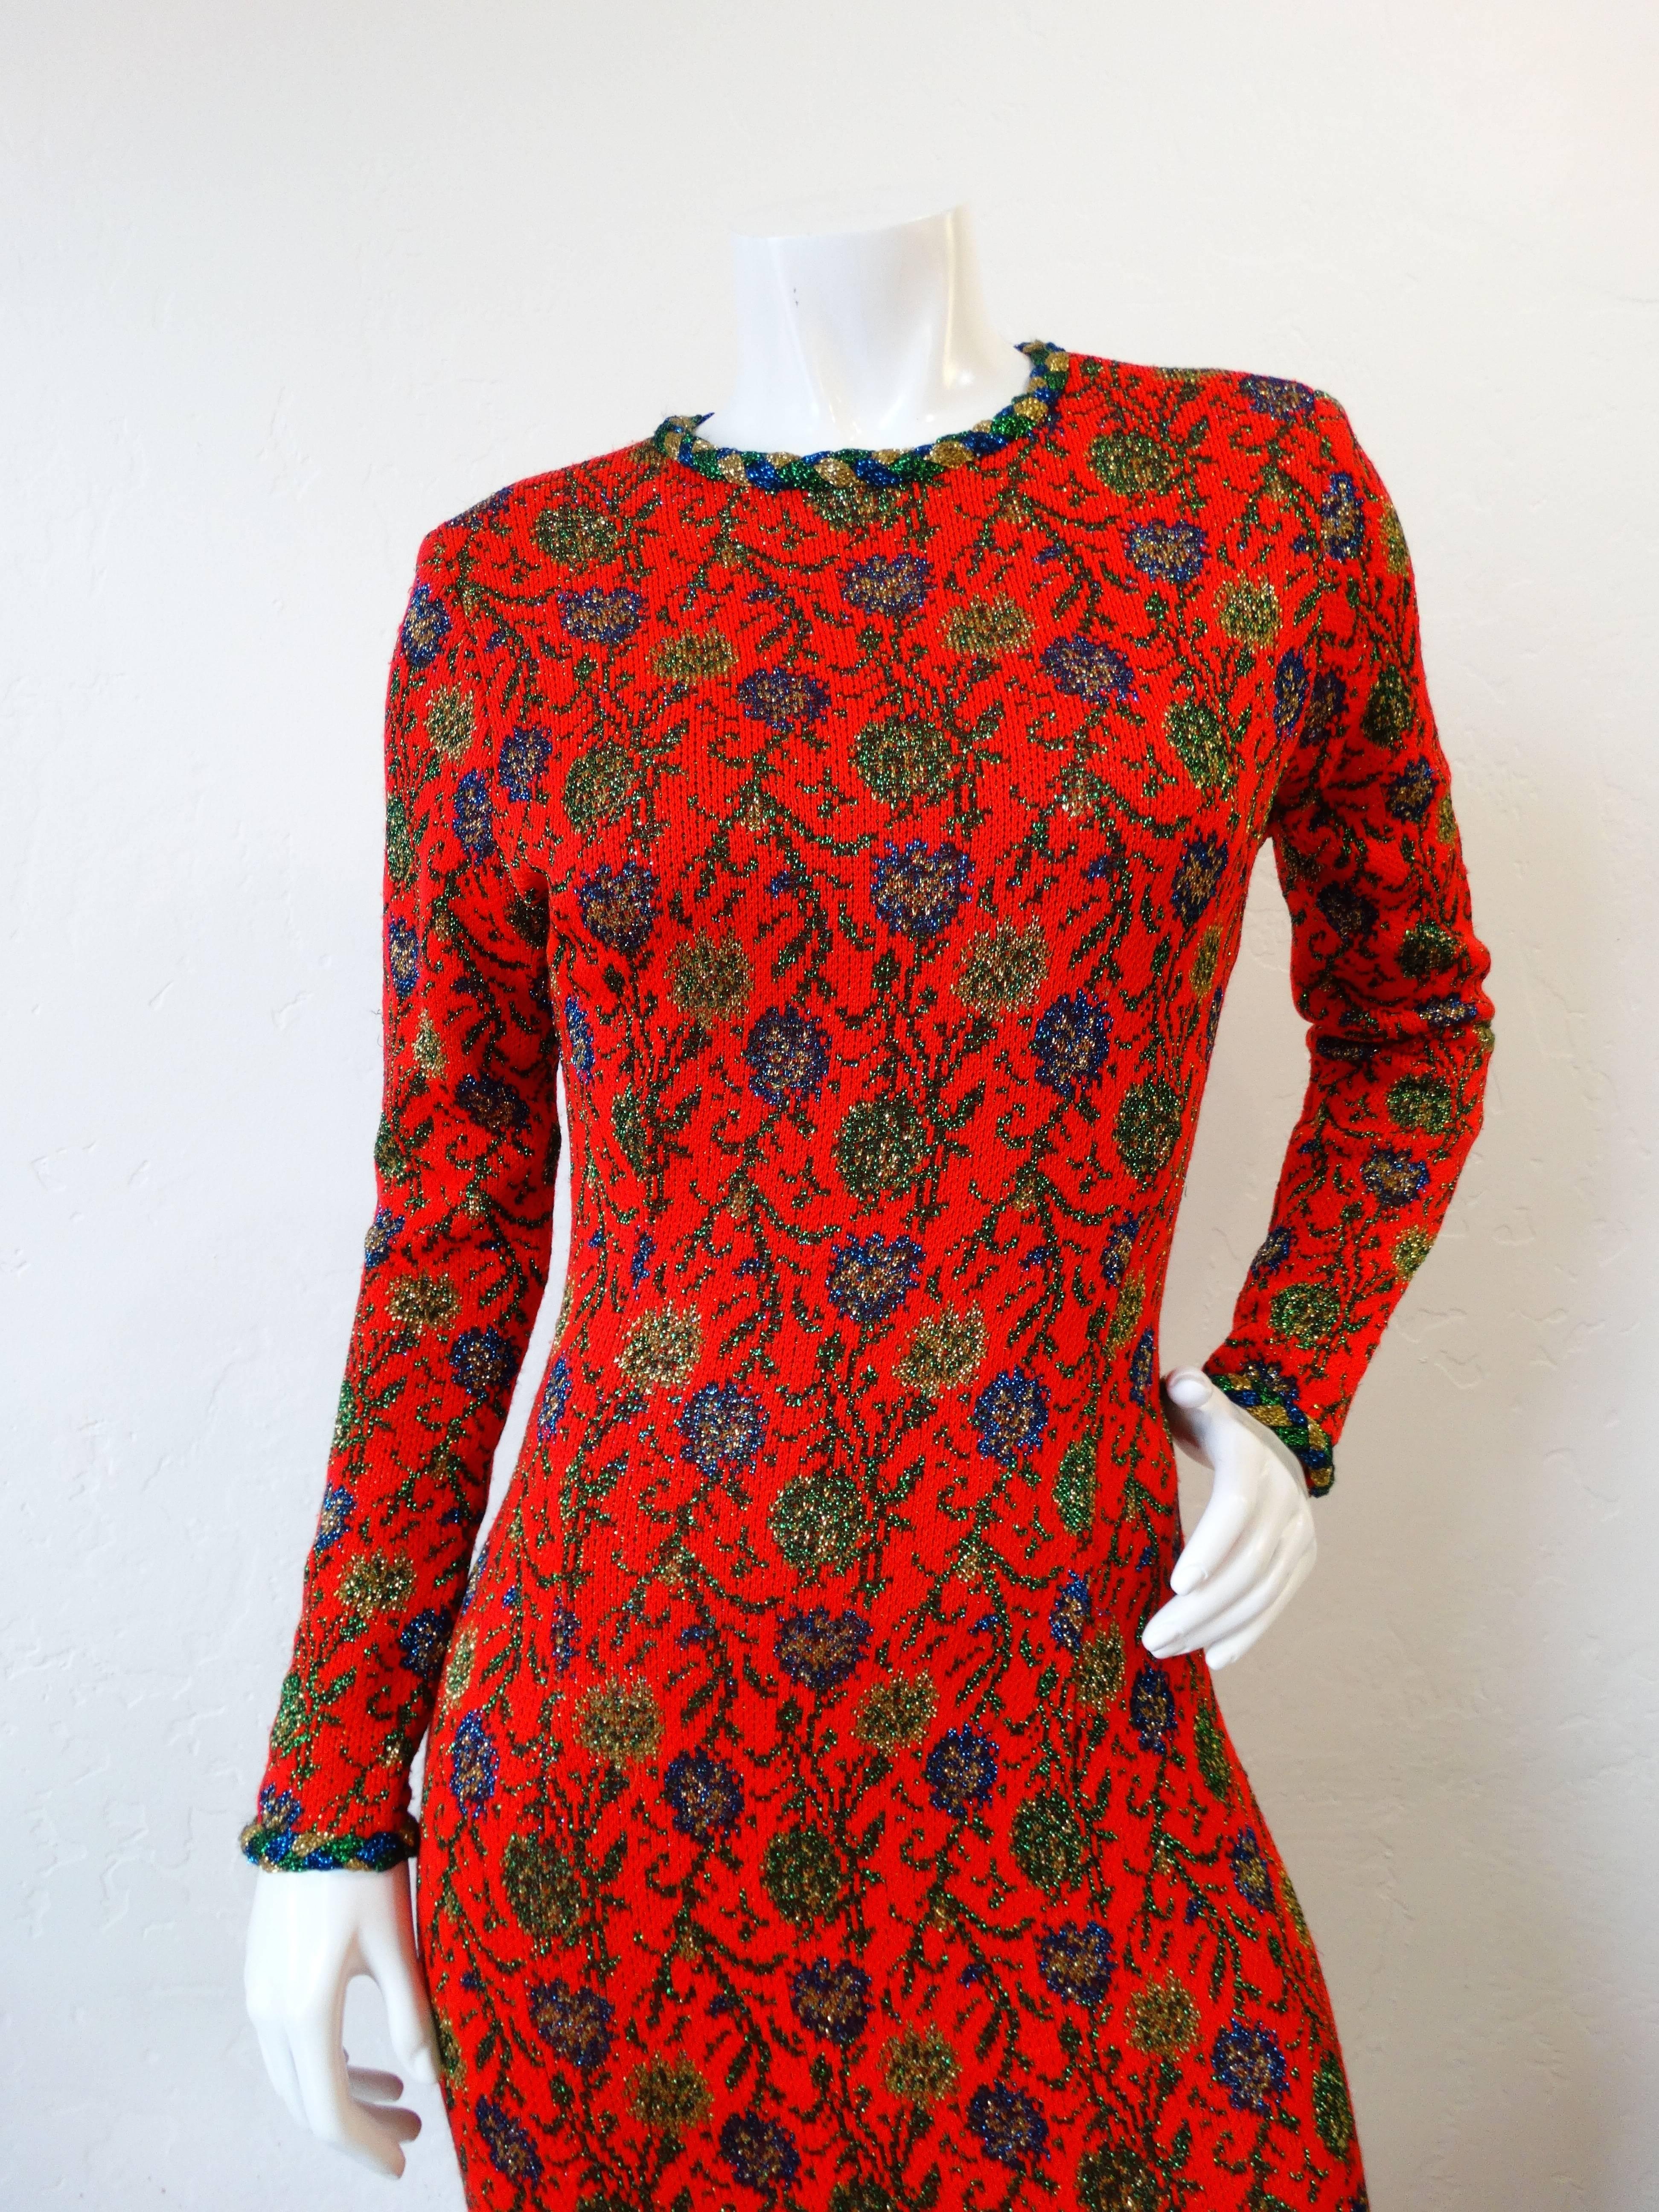 We are lurex obsessed this season! Snag yourself some lurex goodness with out 1970s floral knit maxi dress! Soft and sparkling lurex knit in a red based floral pattern. Stretchy fit allows for a range of sizes to enjoy this piece, though it looks